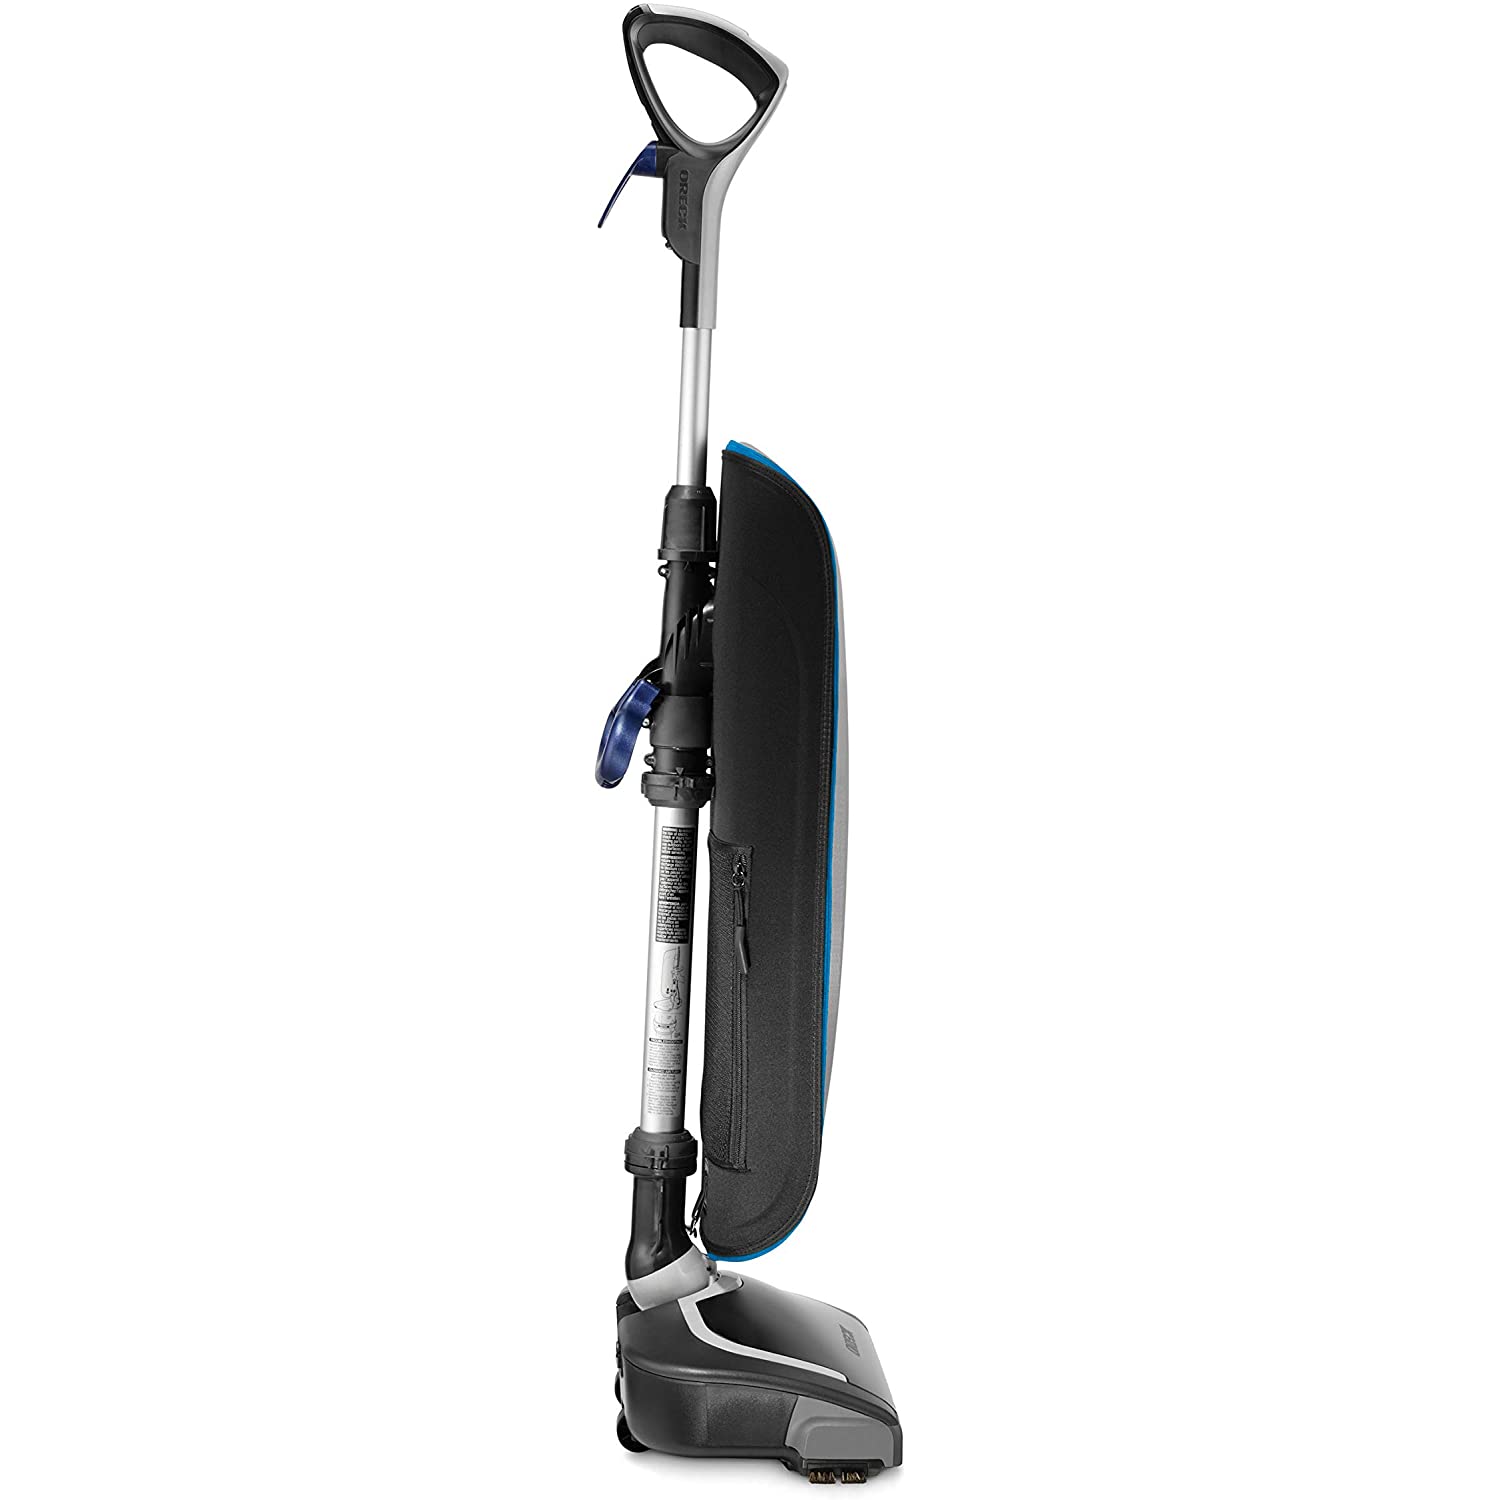 Oreck HEPA Swivel Upright Bagged Vacuum Cleaner, Lightweight Machine for Pets and Home, 35 ft. Power Cord, UK30305PC, Blue - image 2 of 2